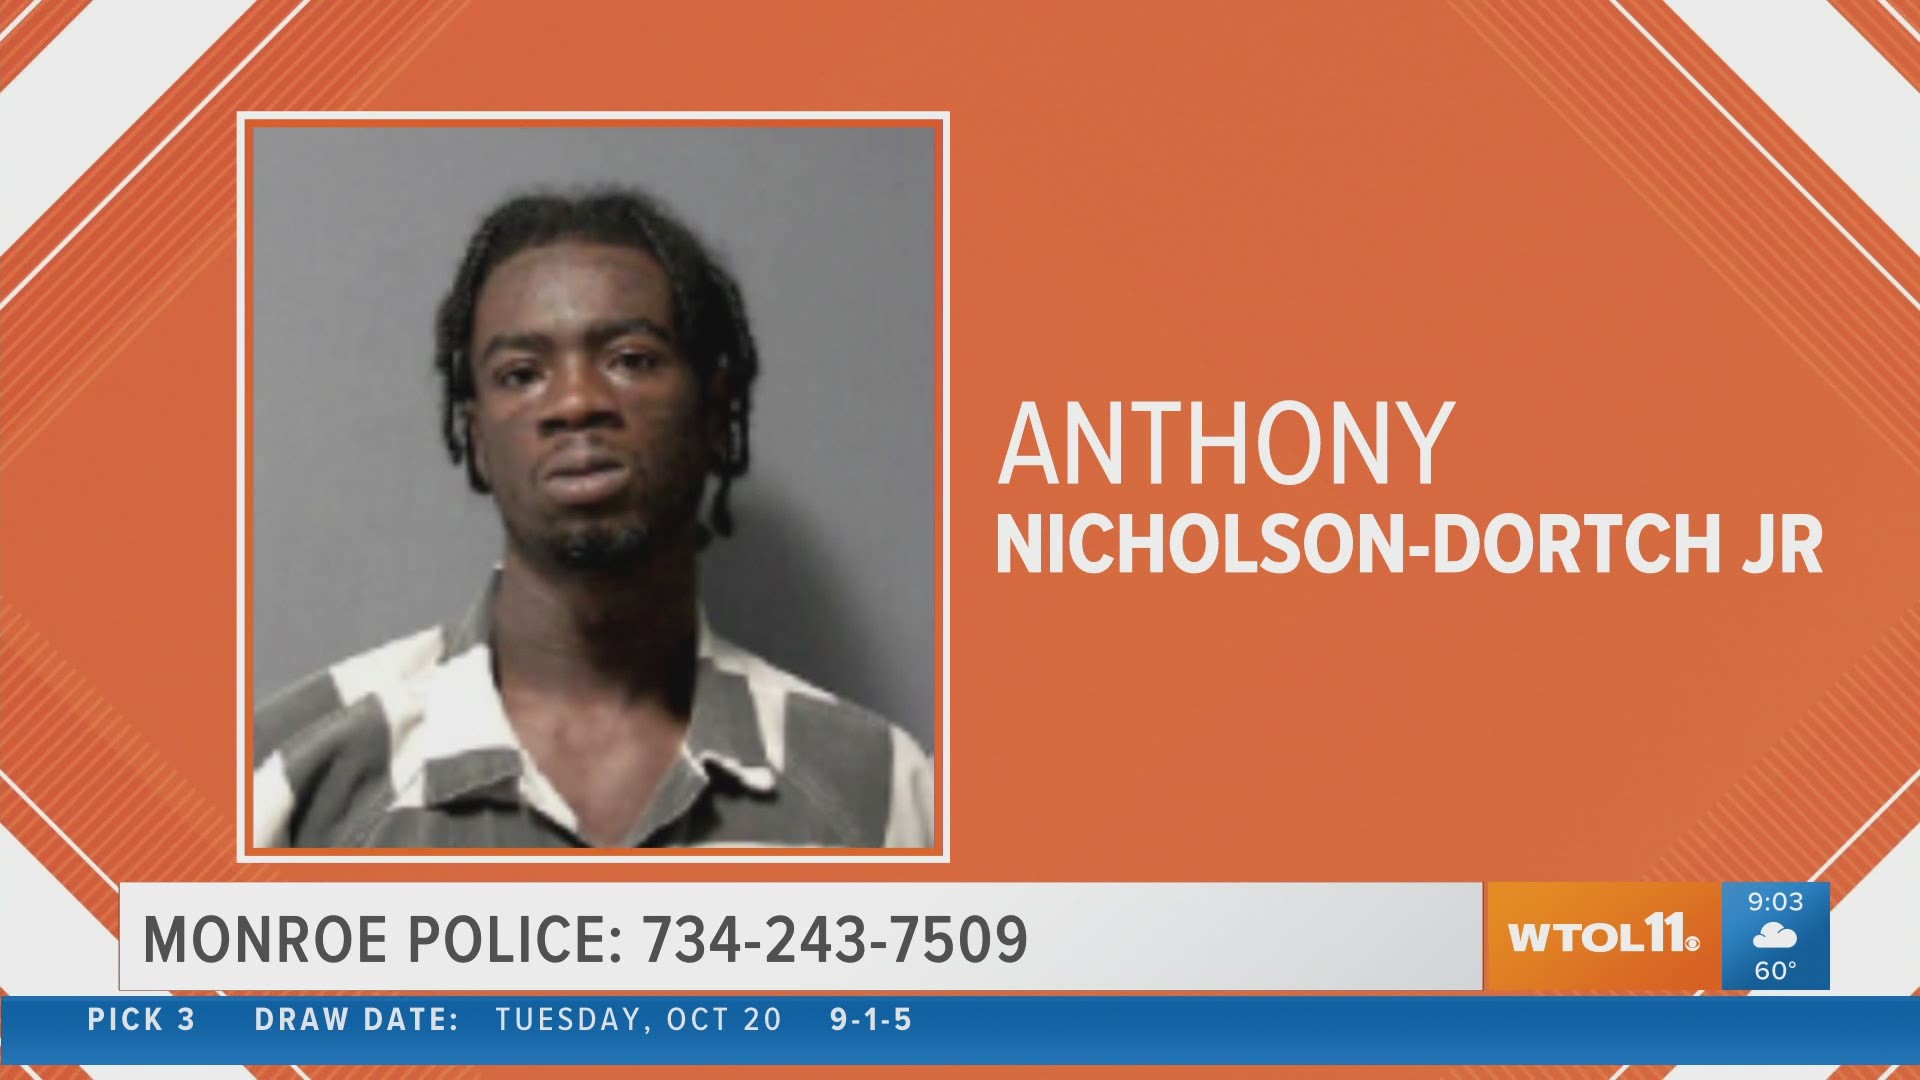 Anthony Deshawn Nicholson-Dortch Jr. is considered a person of interest in an incident that happened Oct. 18. According to police, he is armed and dangerous.